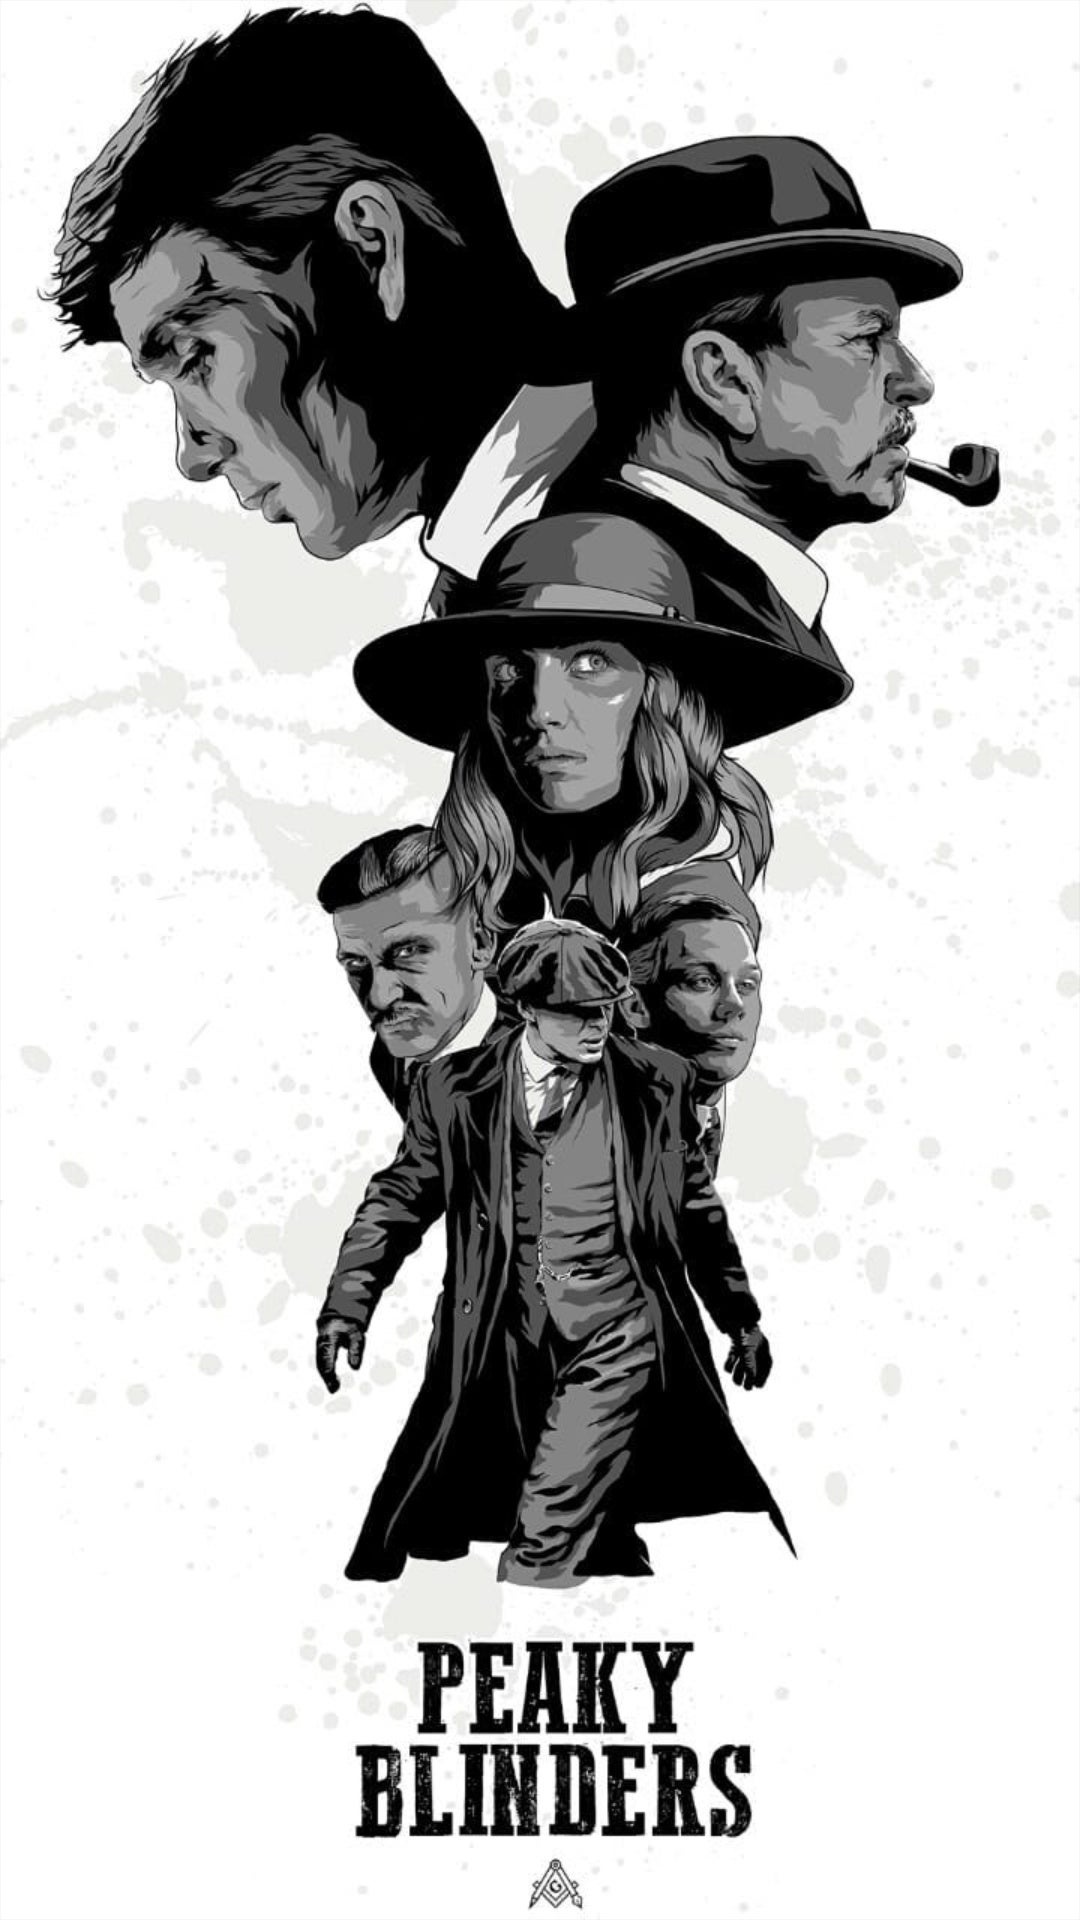 Shelby Family, Peaky Blinders art wallpapers, Top Free, 1080x1920 Full HD Phone